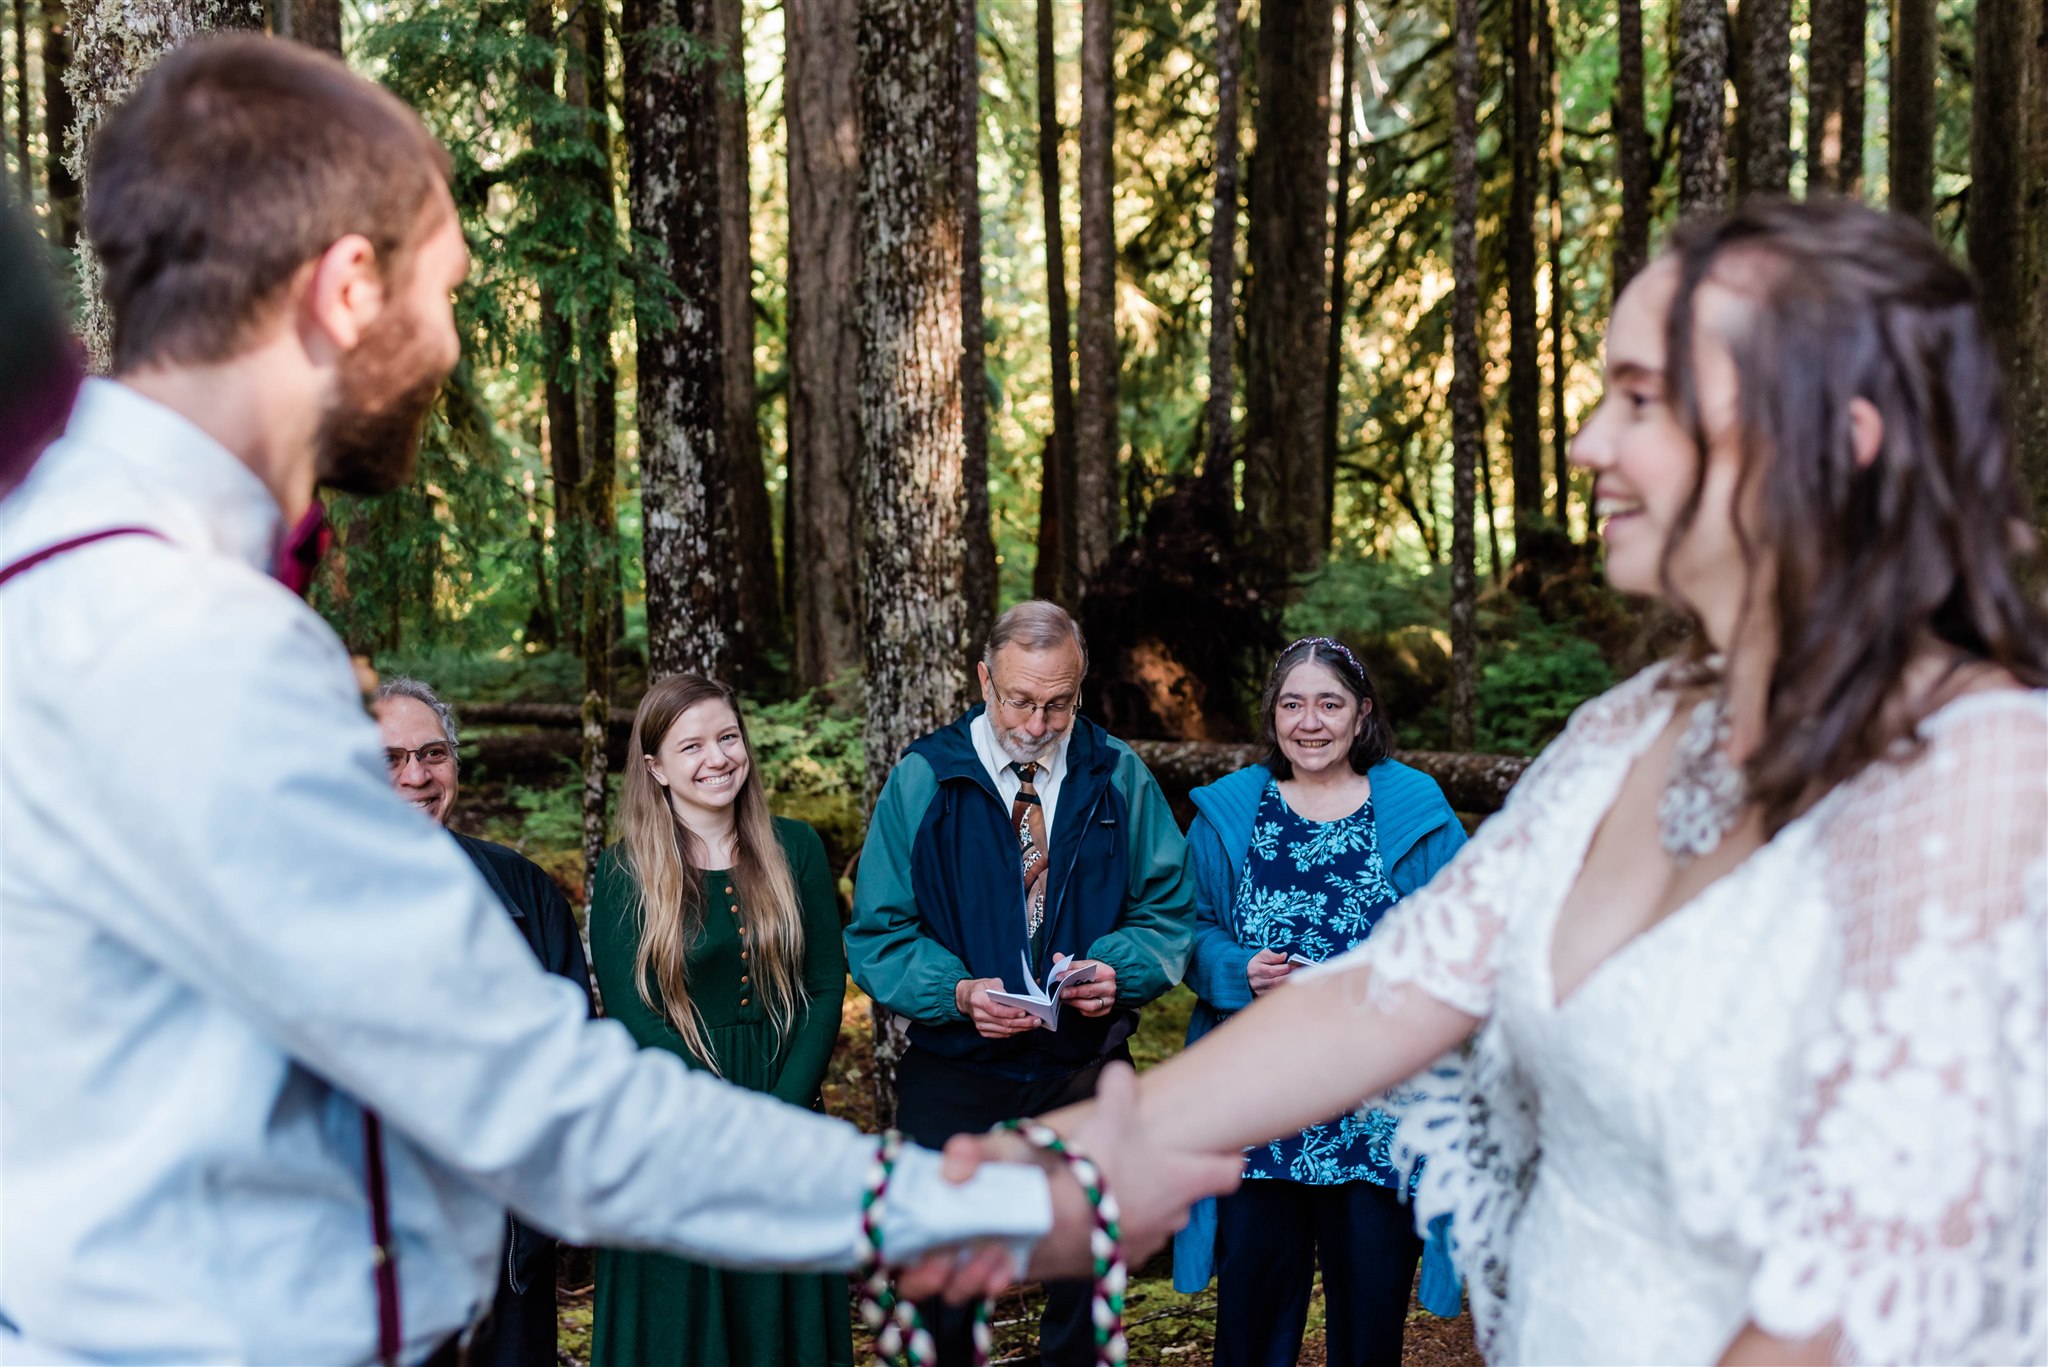 Couple holds hands while family smiles behind them in the forest.